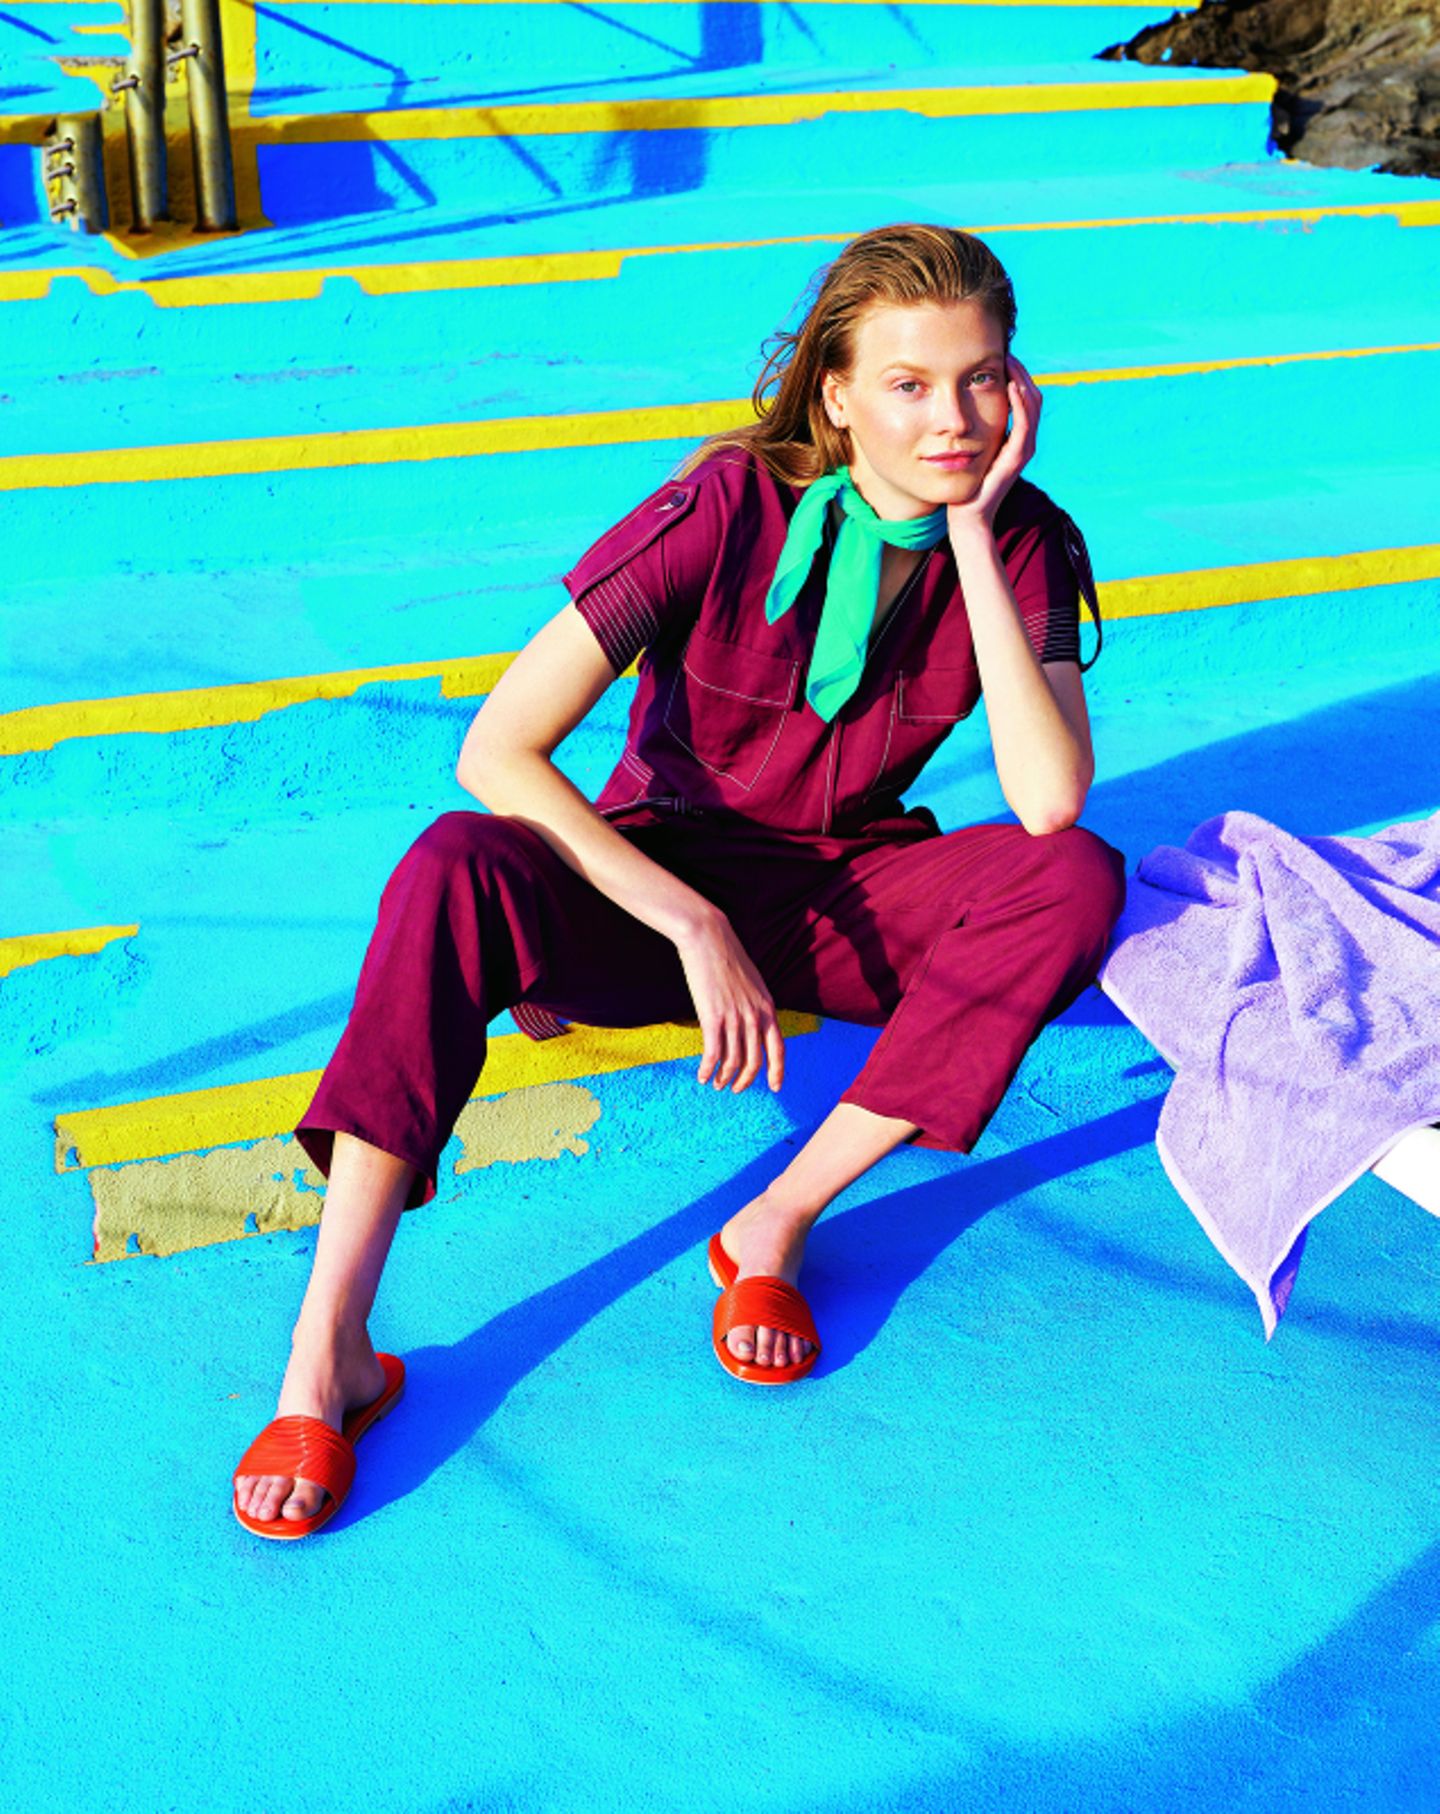 Bunte Mode: Roter Overall